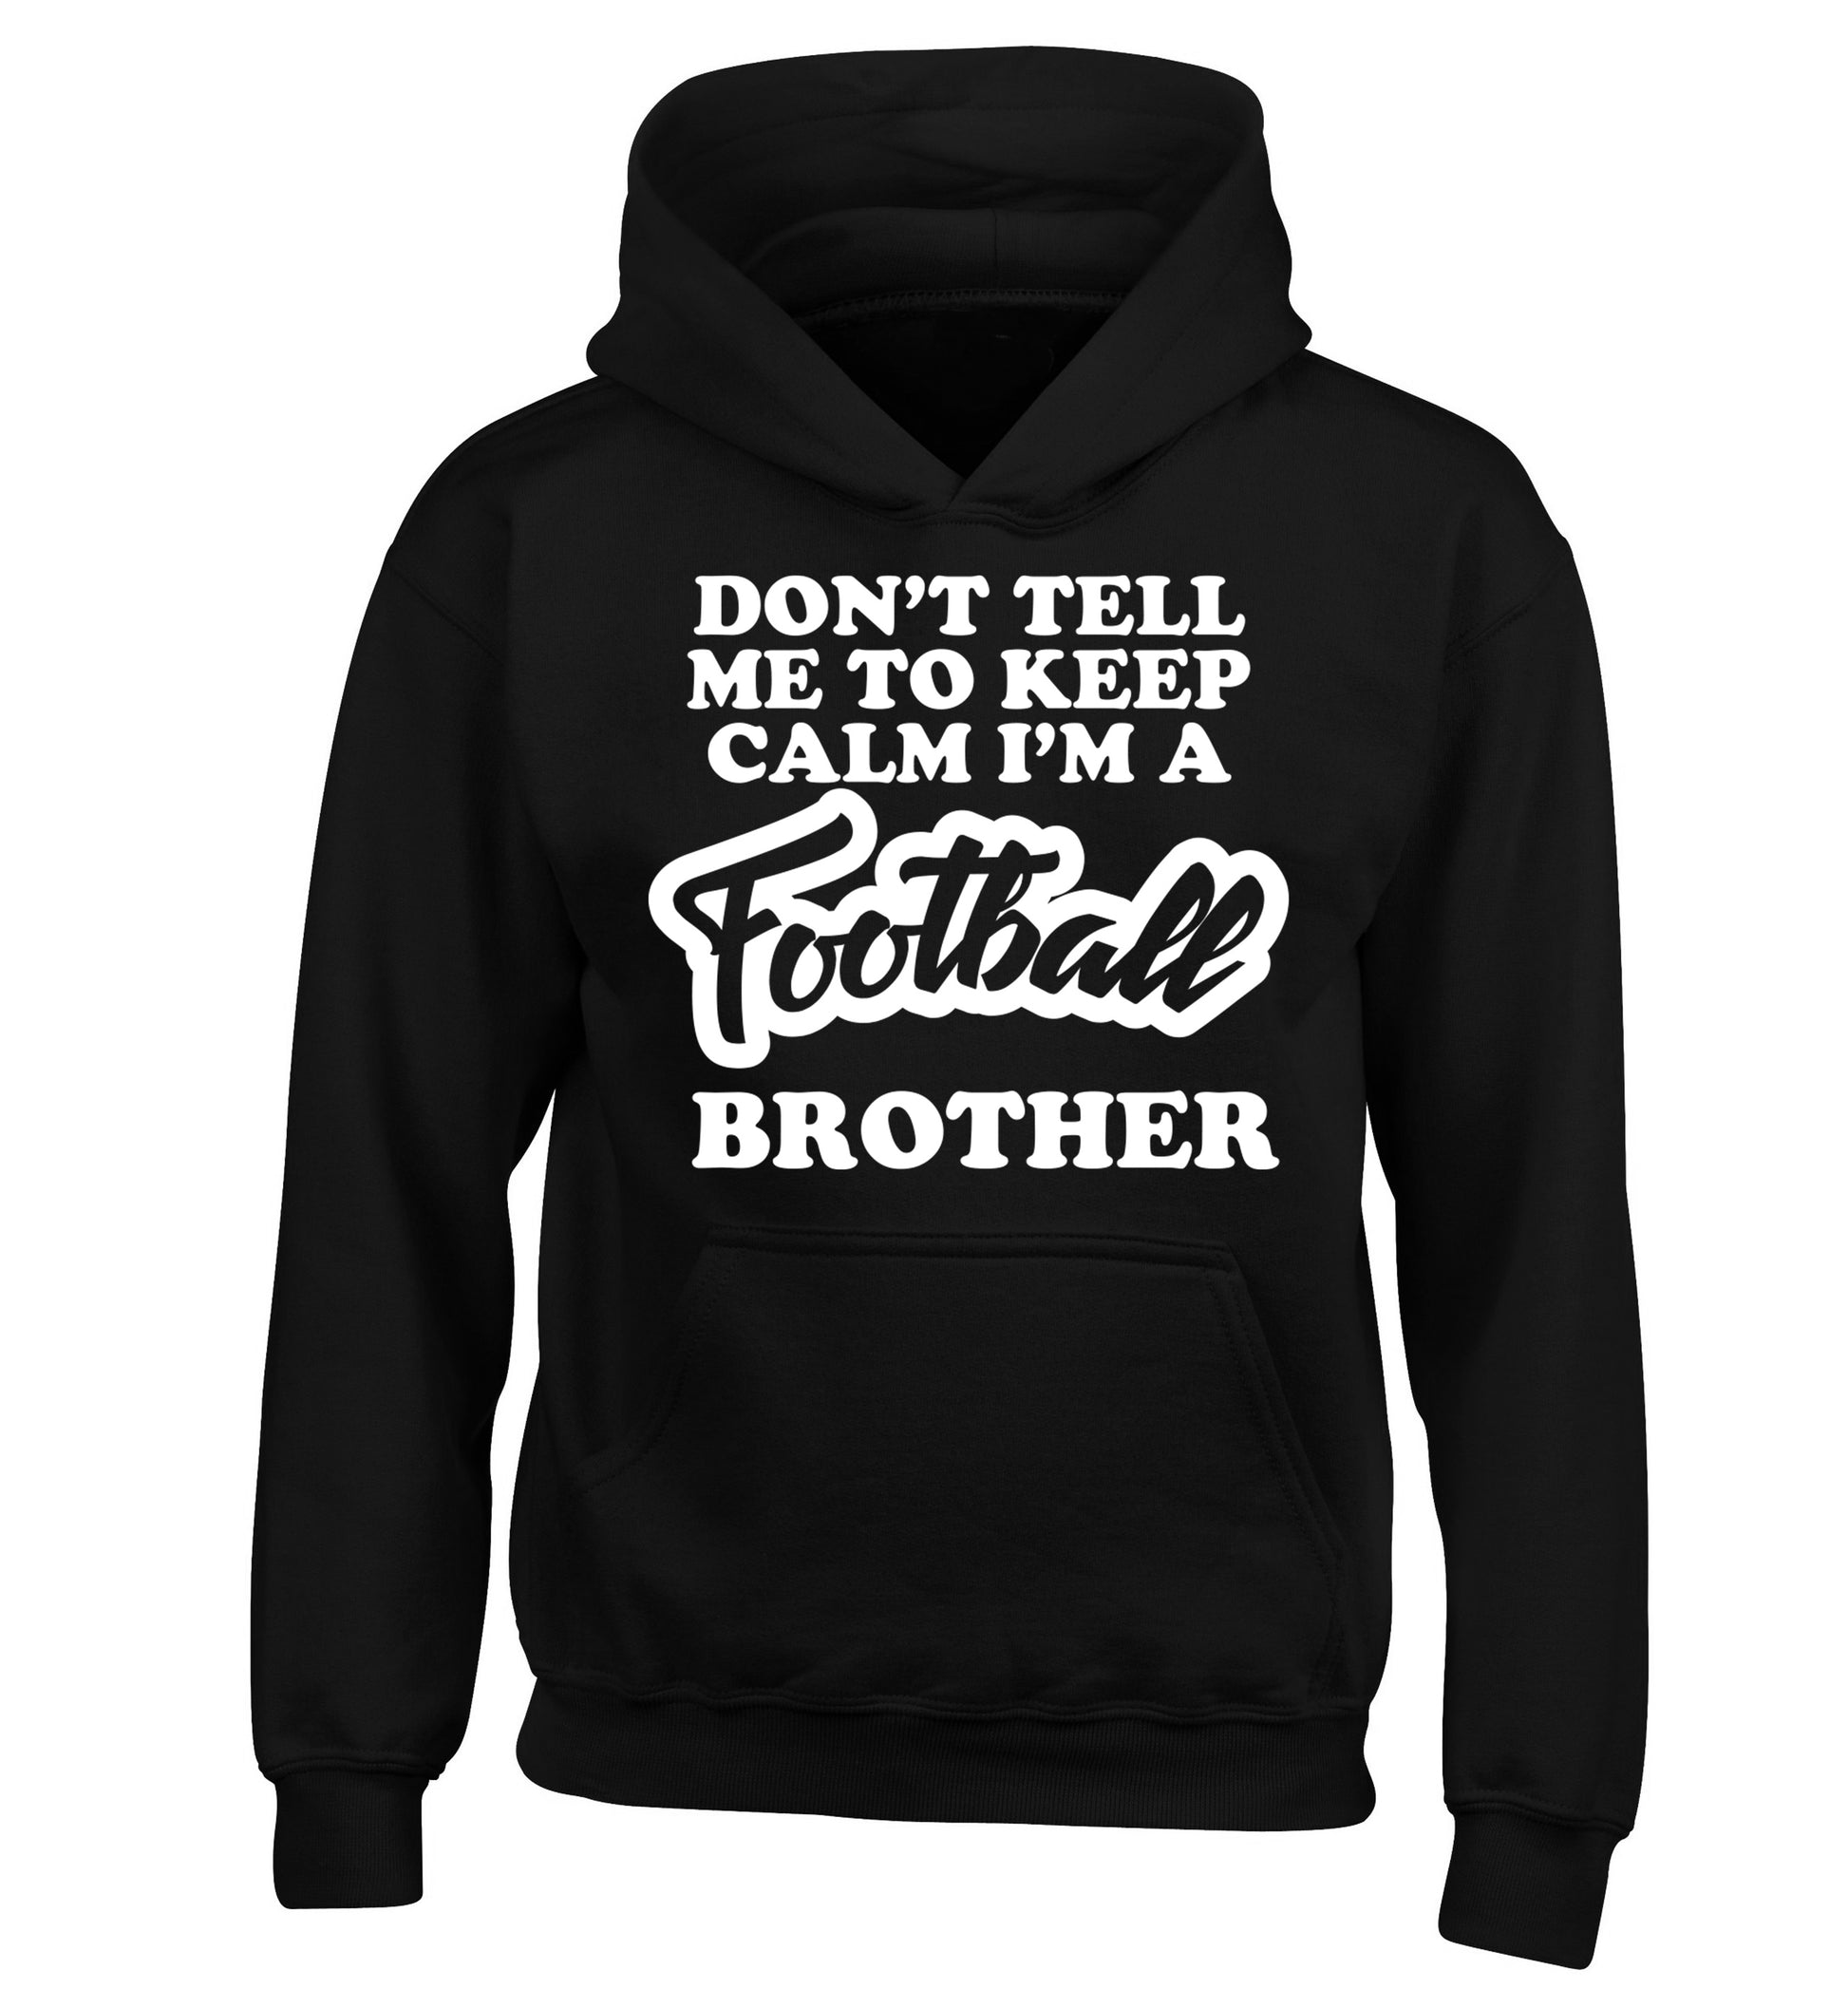 Don't tell me to keep calm I'm a football brother children's black hoodie 12-14 Years